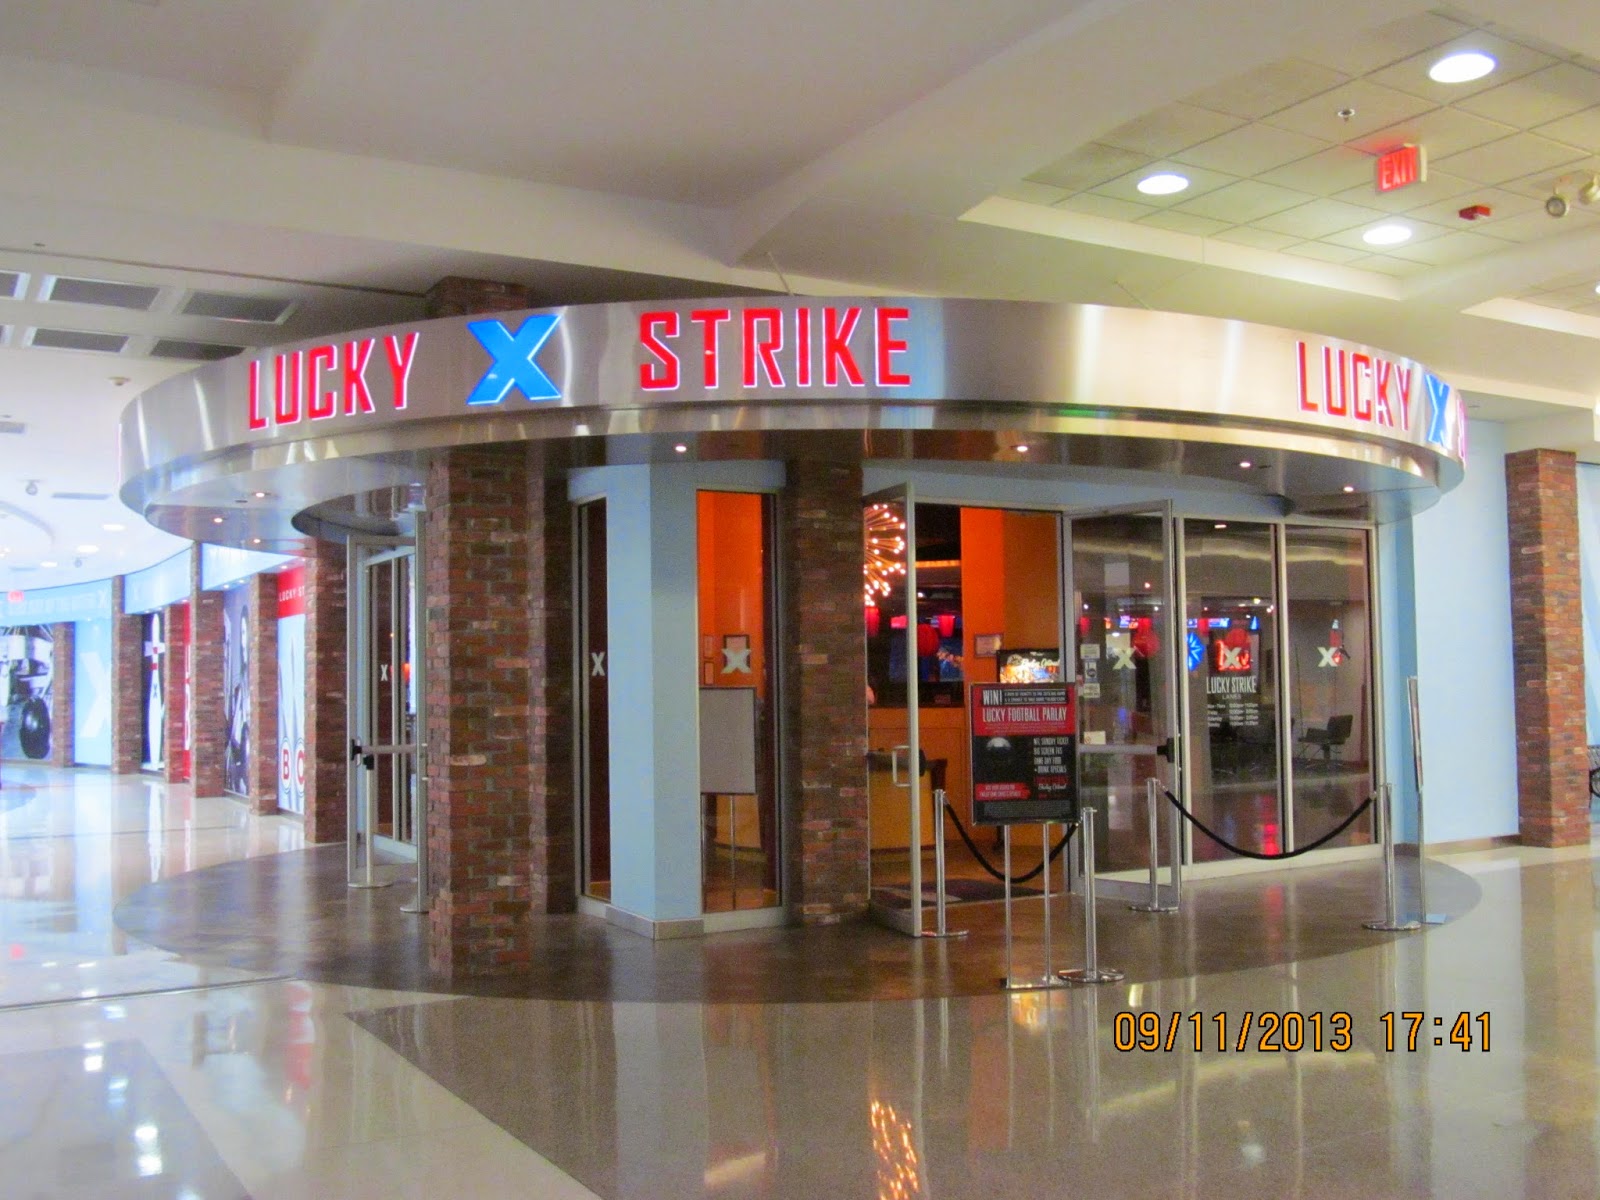 And entertainment venue Lucky Strike's Bowling Alley.